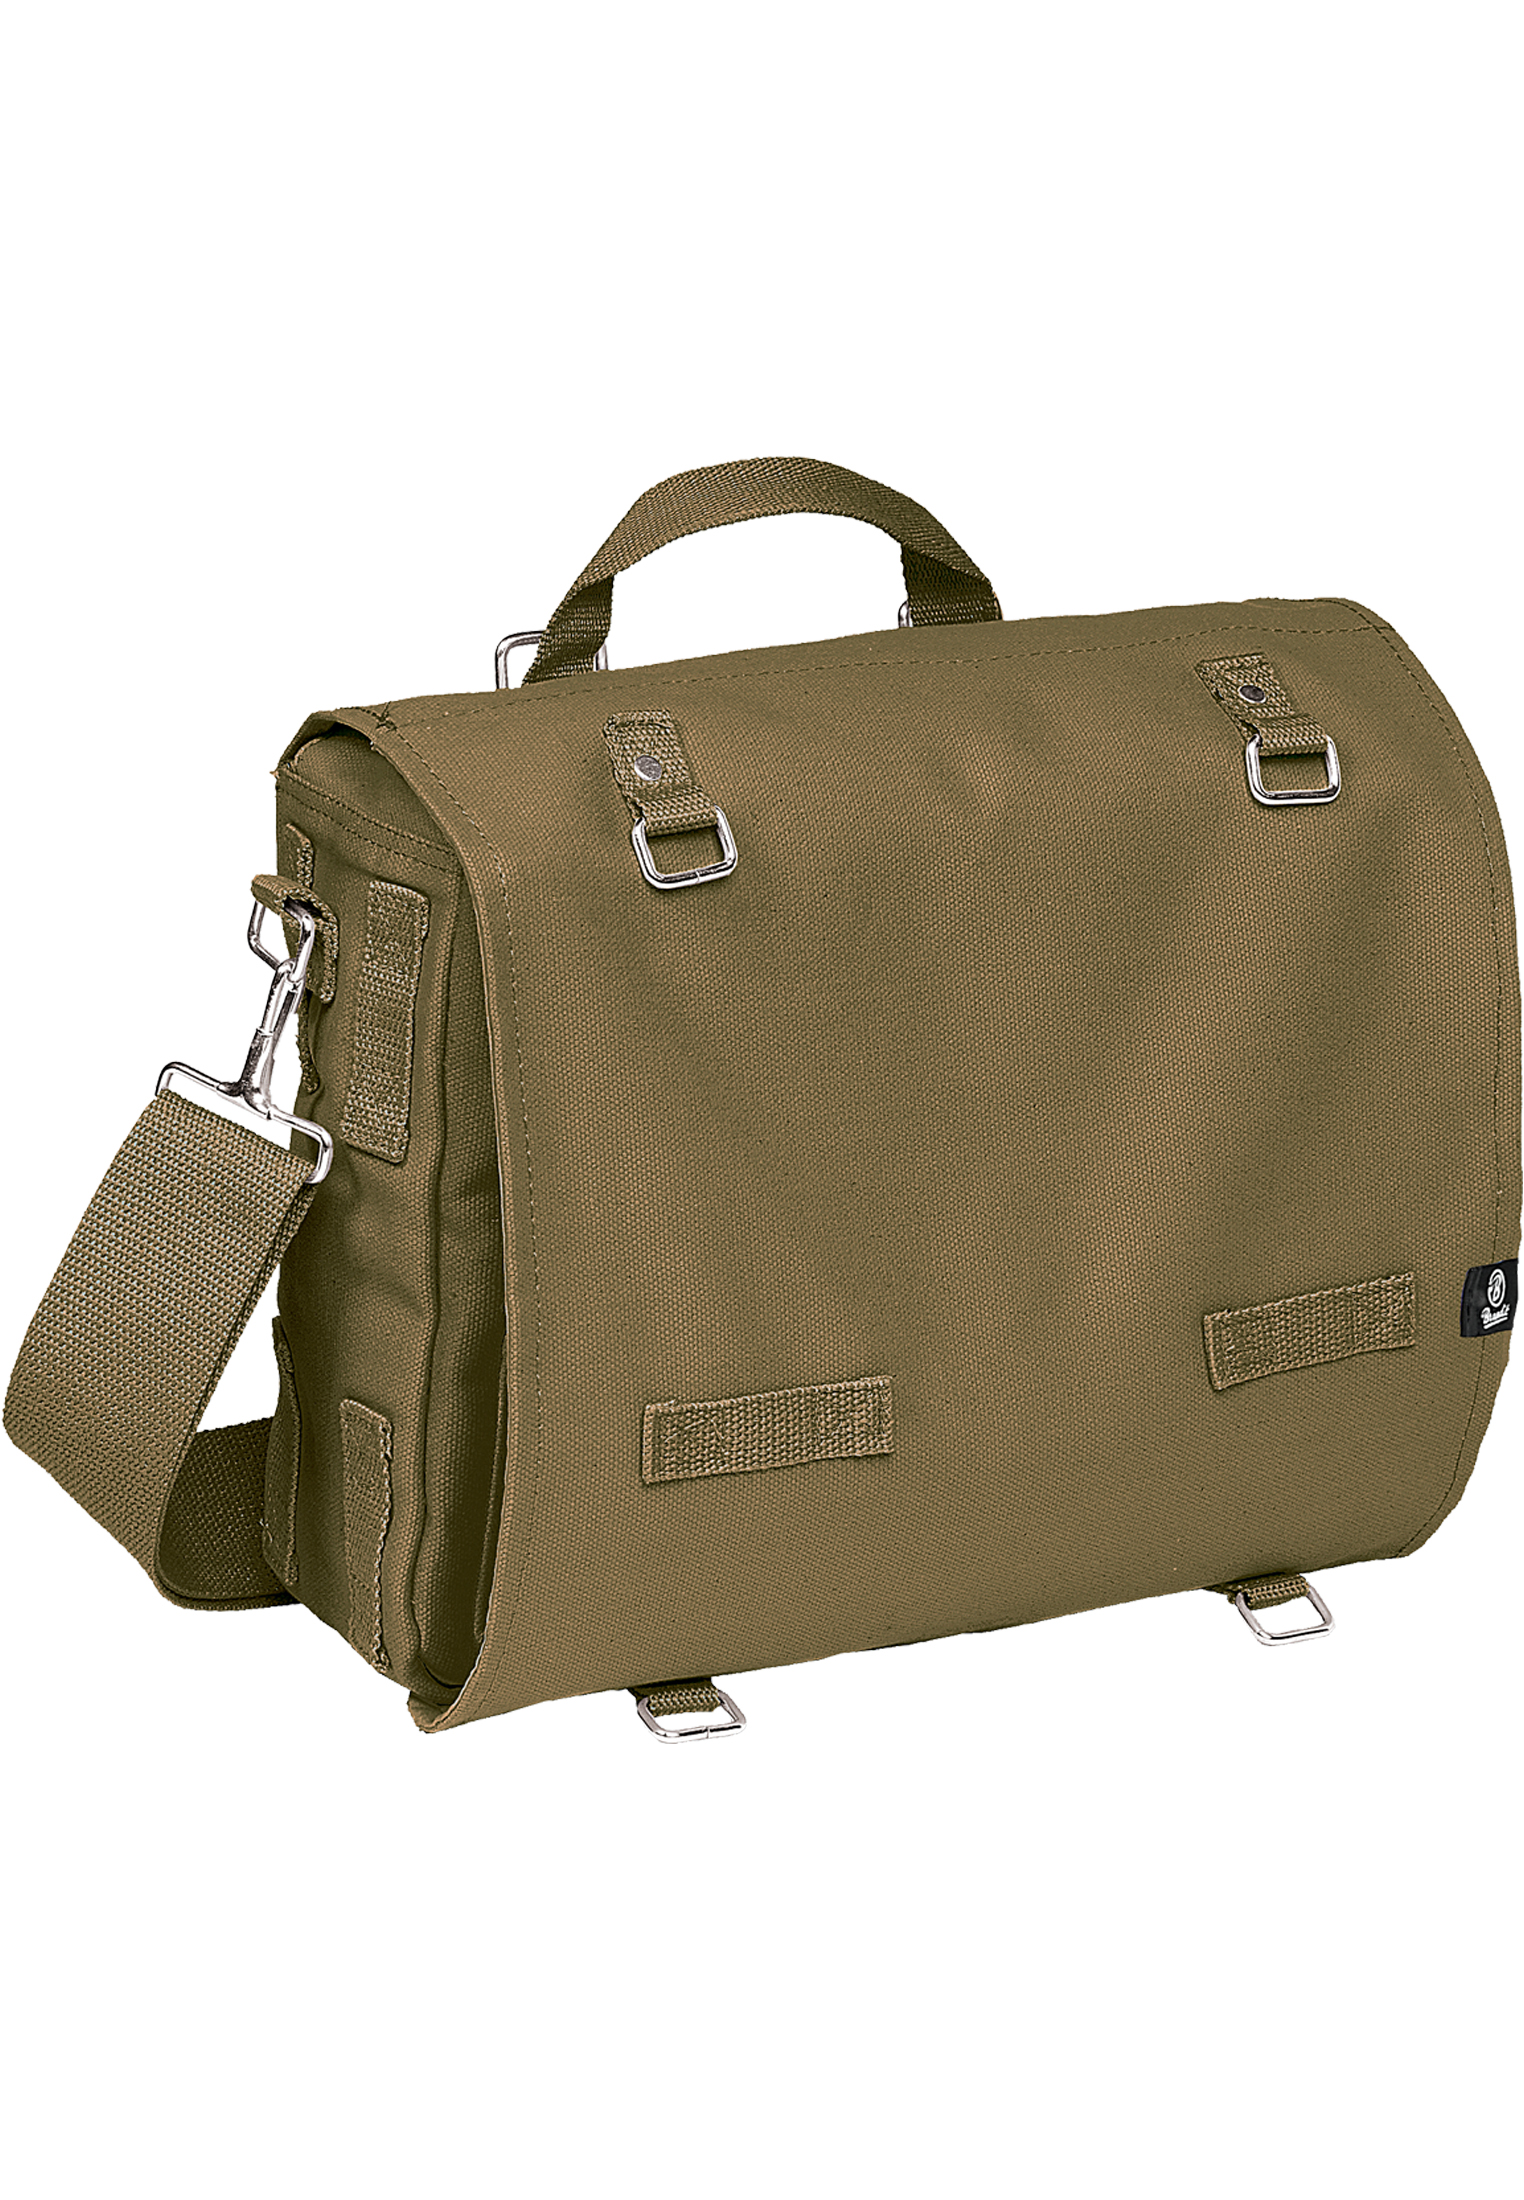 Taschen Big Military Bag in Farbe olive